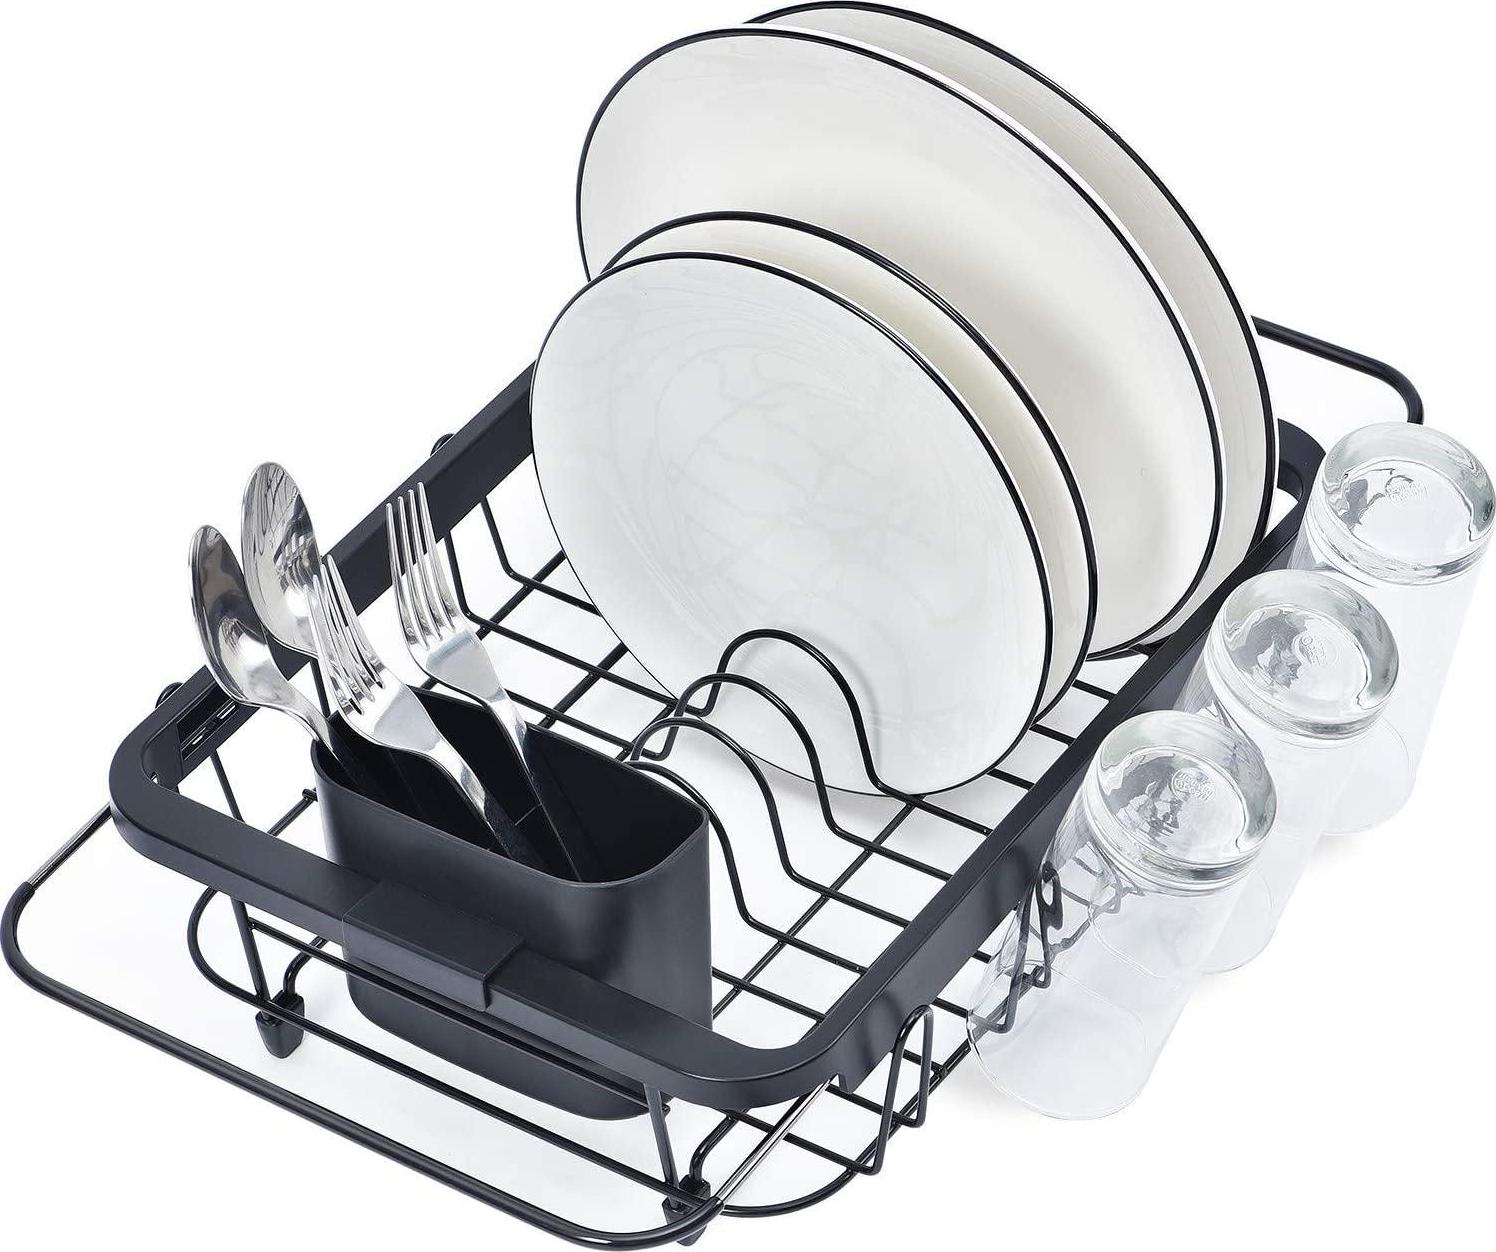 KK KINGRACK, Kingrack Dish Sink Drainer, Dish Drying Rack Over Sink, Extendable Dish Drainer Black with Removable Cutlery Holder, Glass Holder,Dish Rack in Sink or On Counter, Plate Rack Drainer for Kitchen